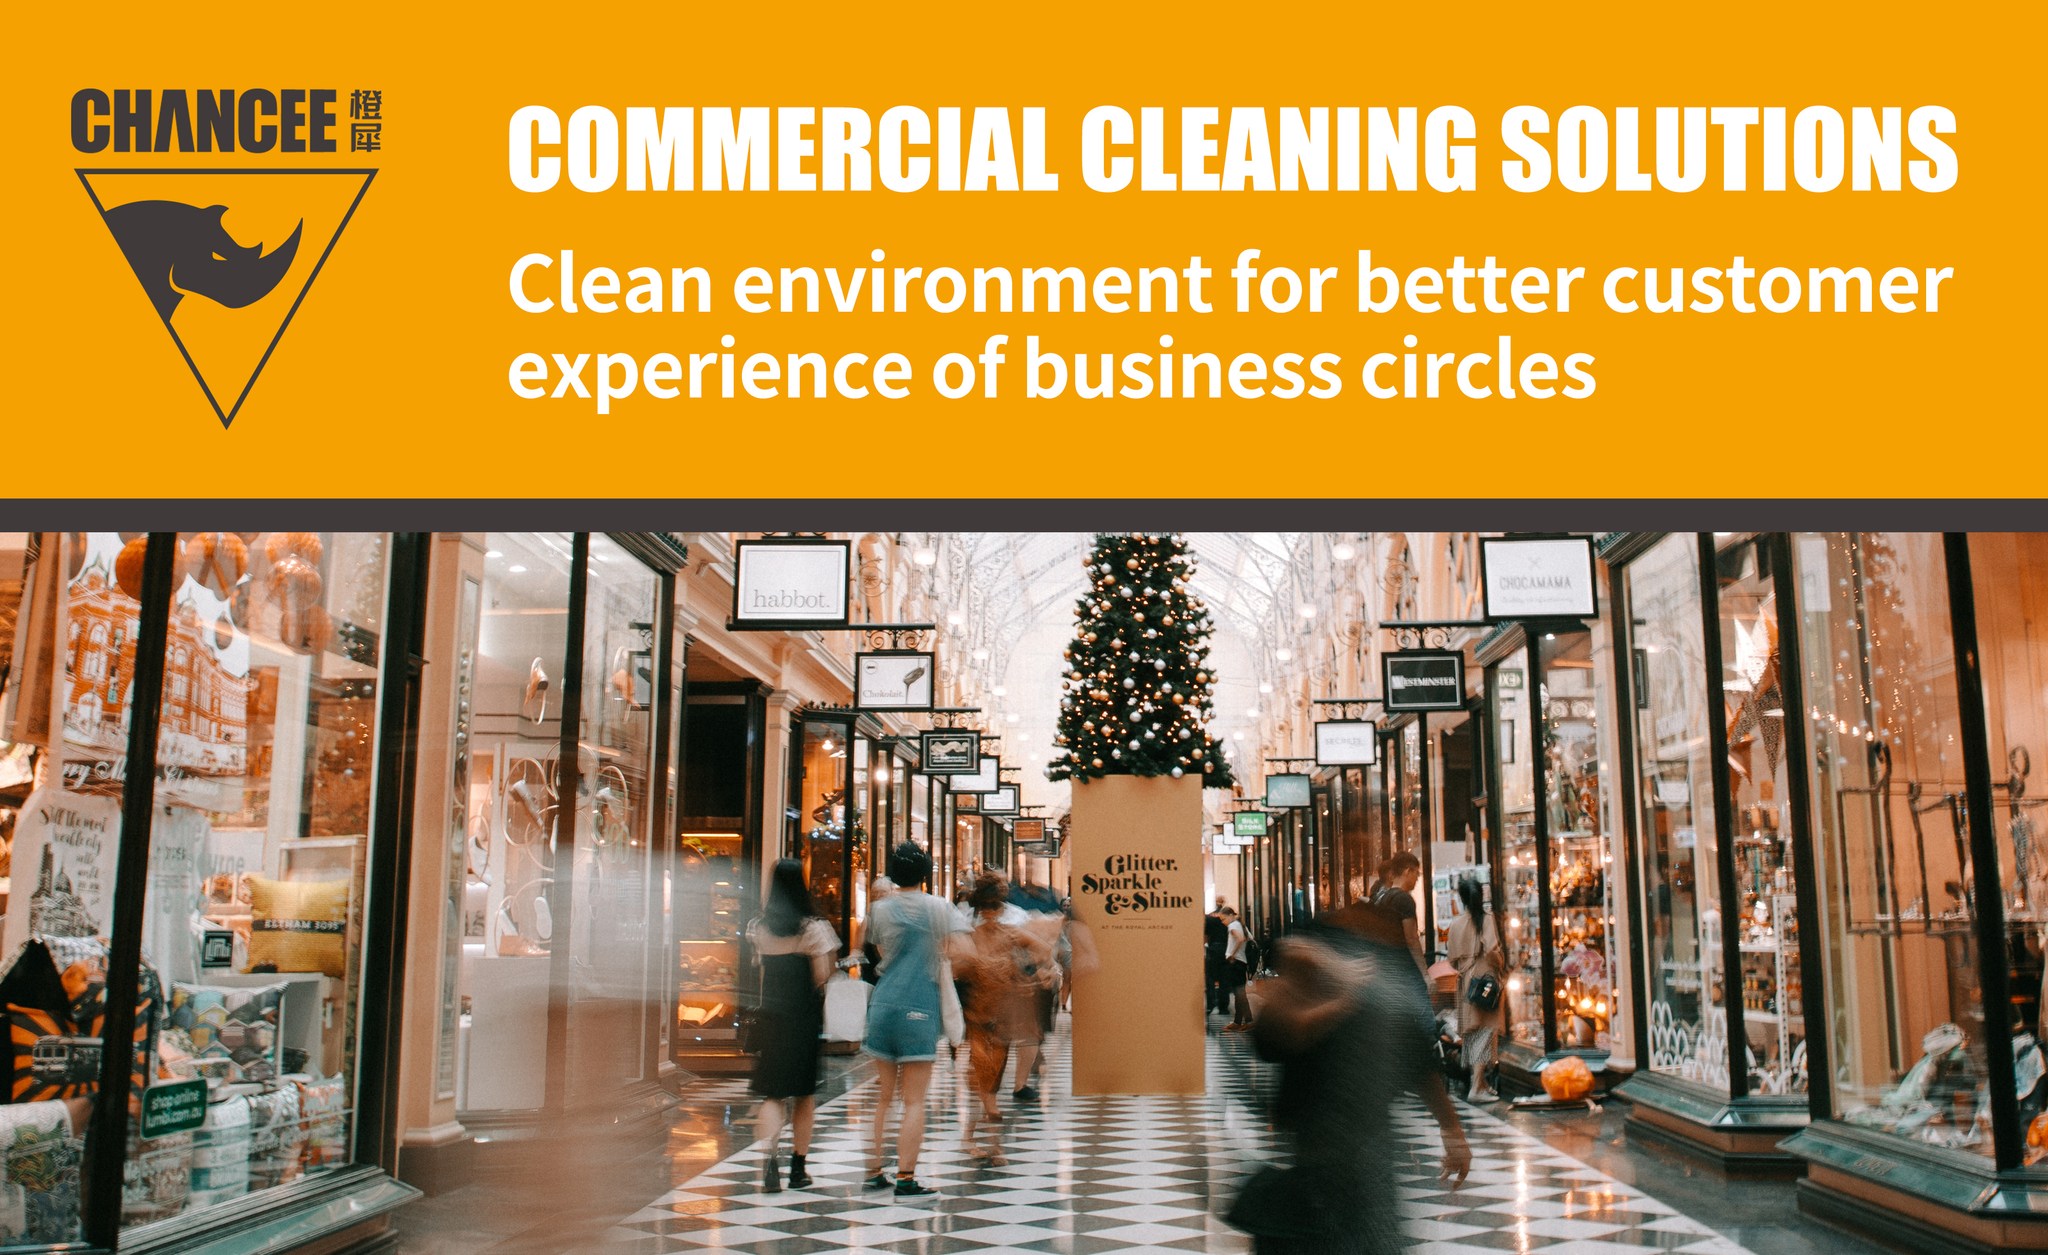 chancee commercial cleaning solution